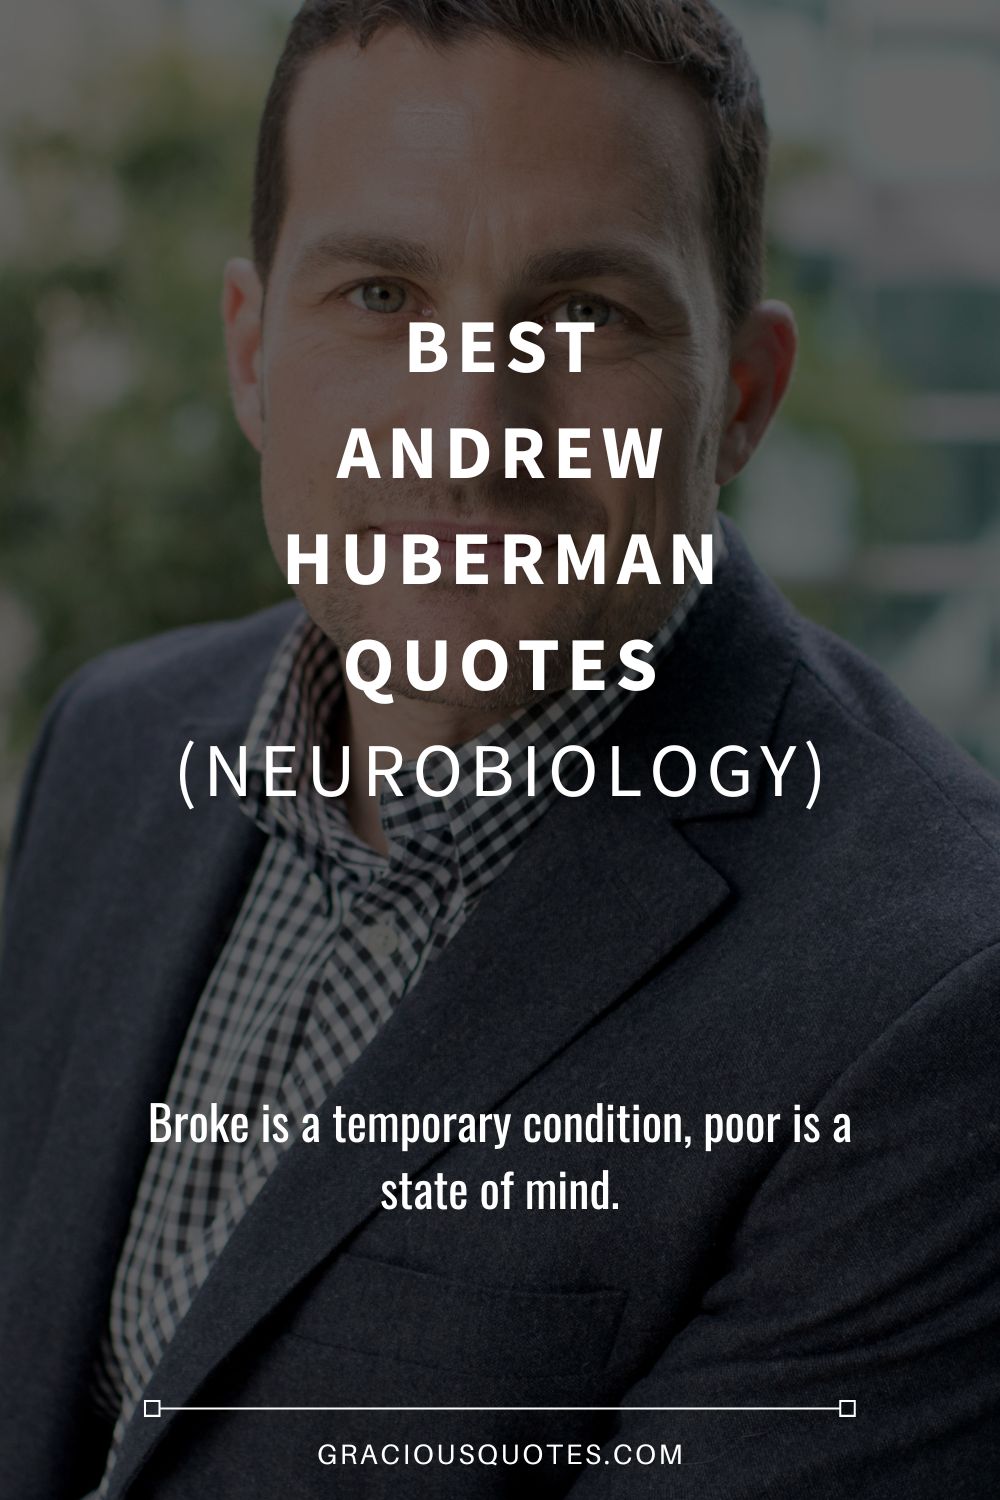 Best Andrew Huberman Quotes (NEUROBIOLOGY) - Gracious Quotes